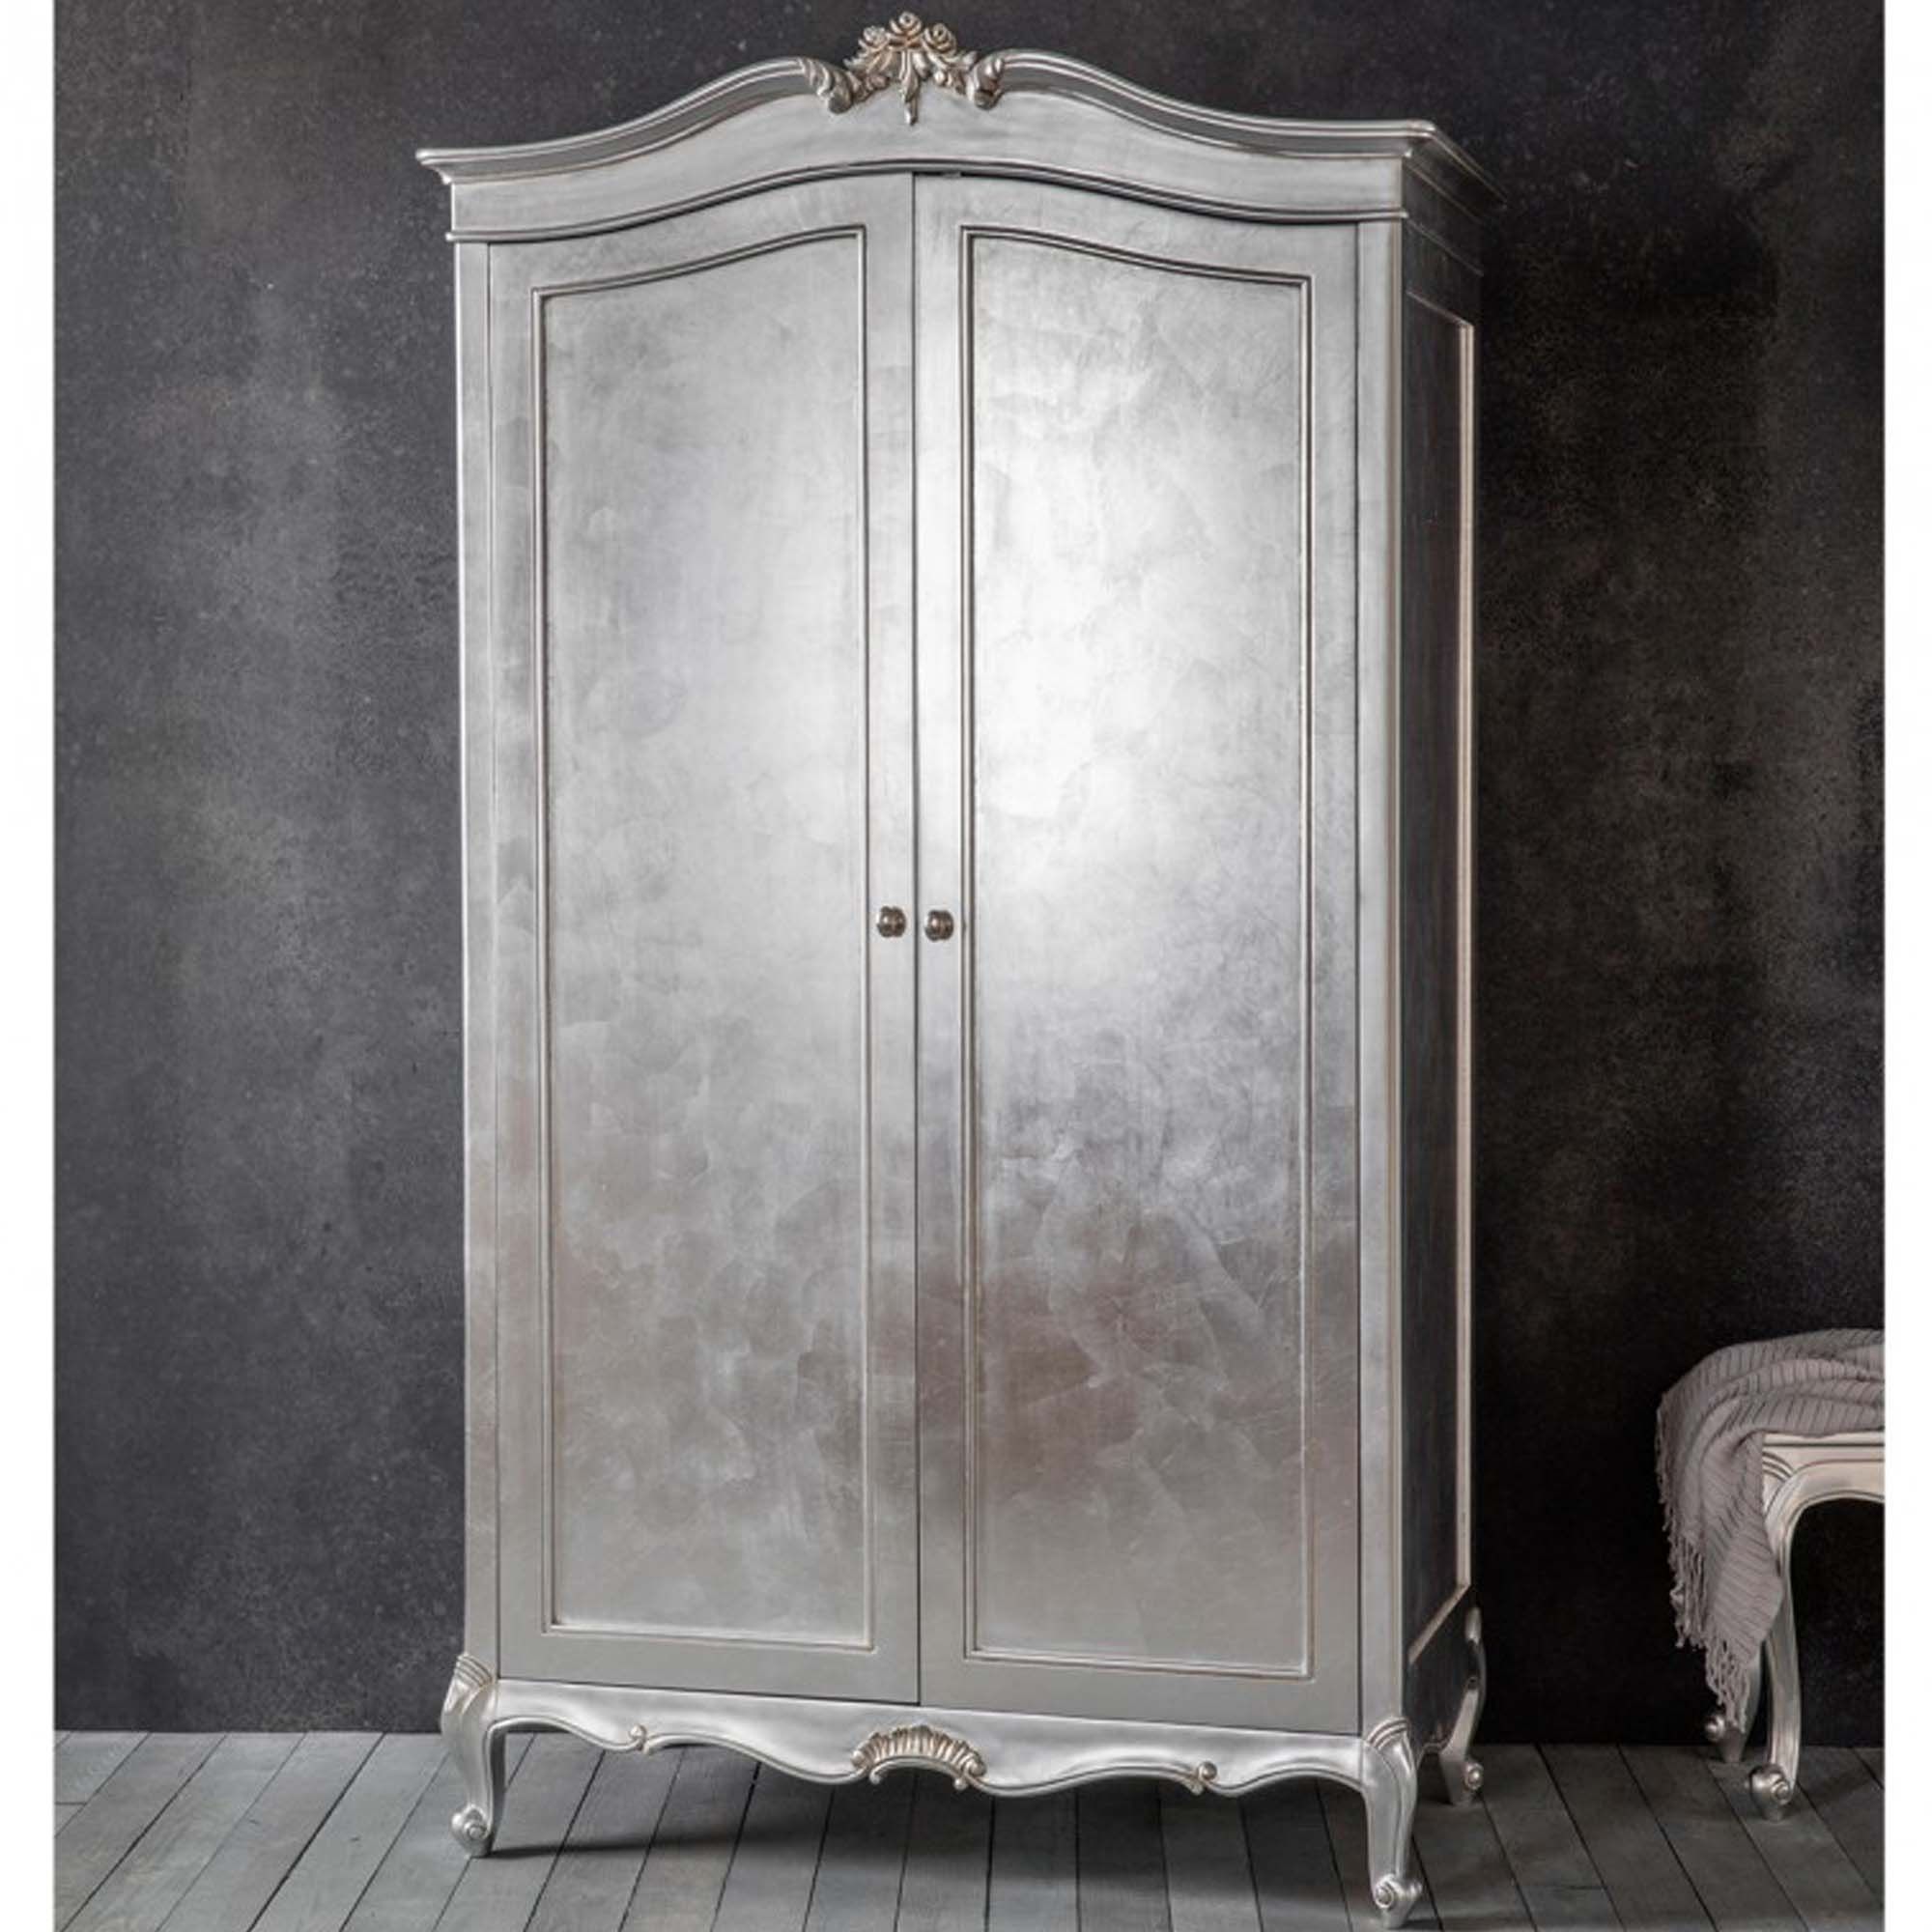 Chic Silver 2 Door Shabby Chic Wardrobe | Homesdirect365 Inside Silver Wardrobes (View 11 of 15)